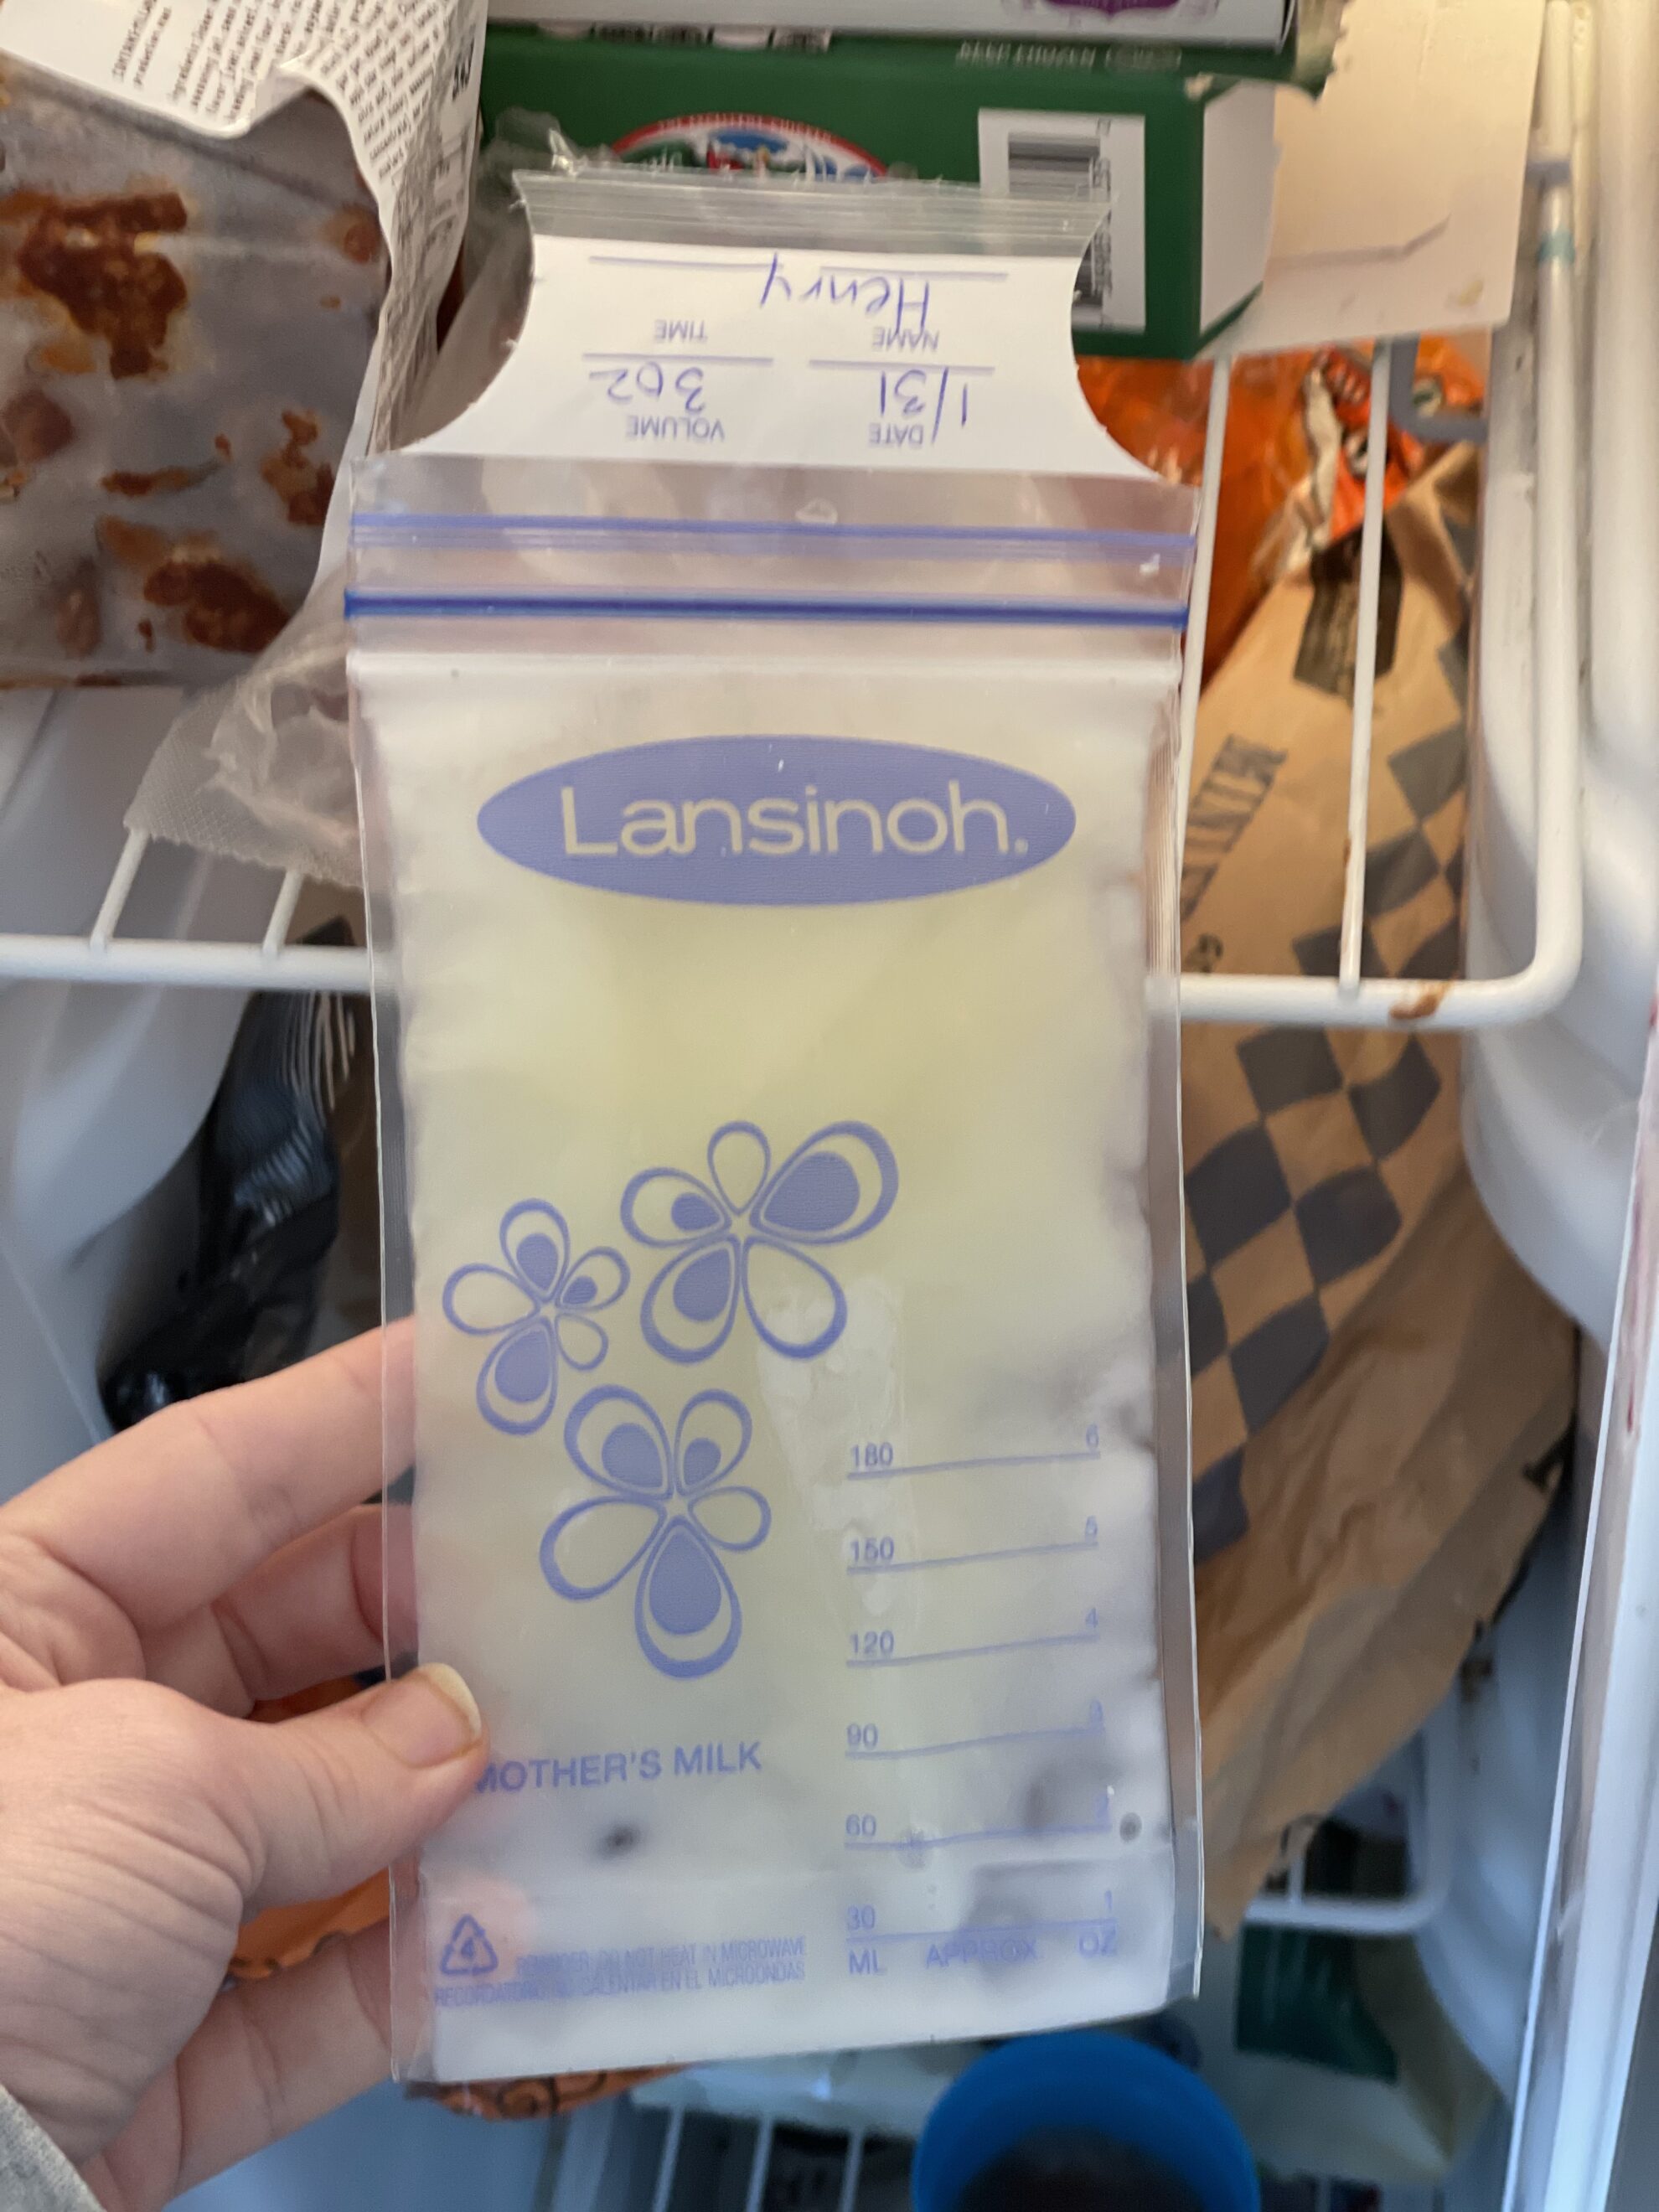  Dr. Brown's Breastmilk Storage Bags for Freezing and